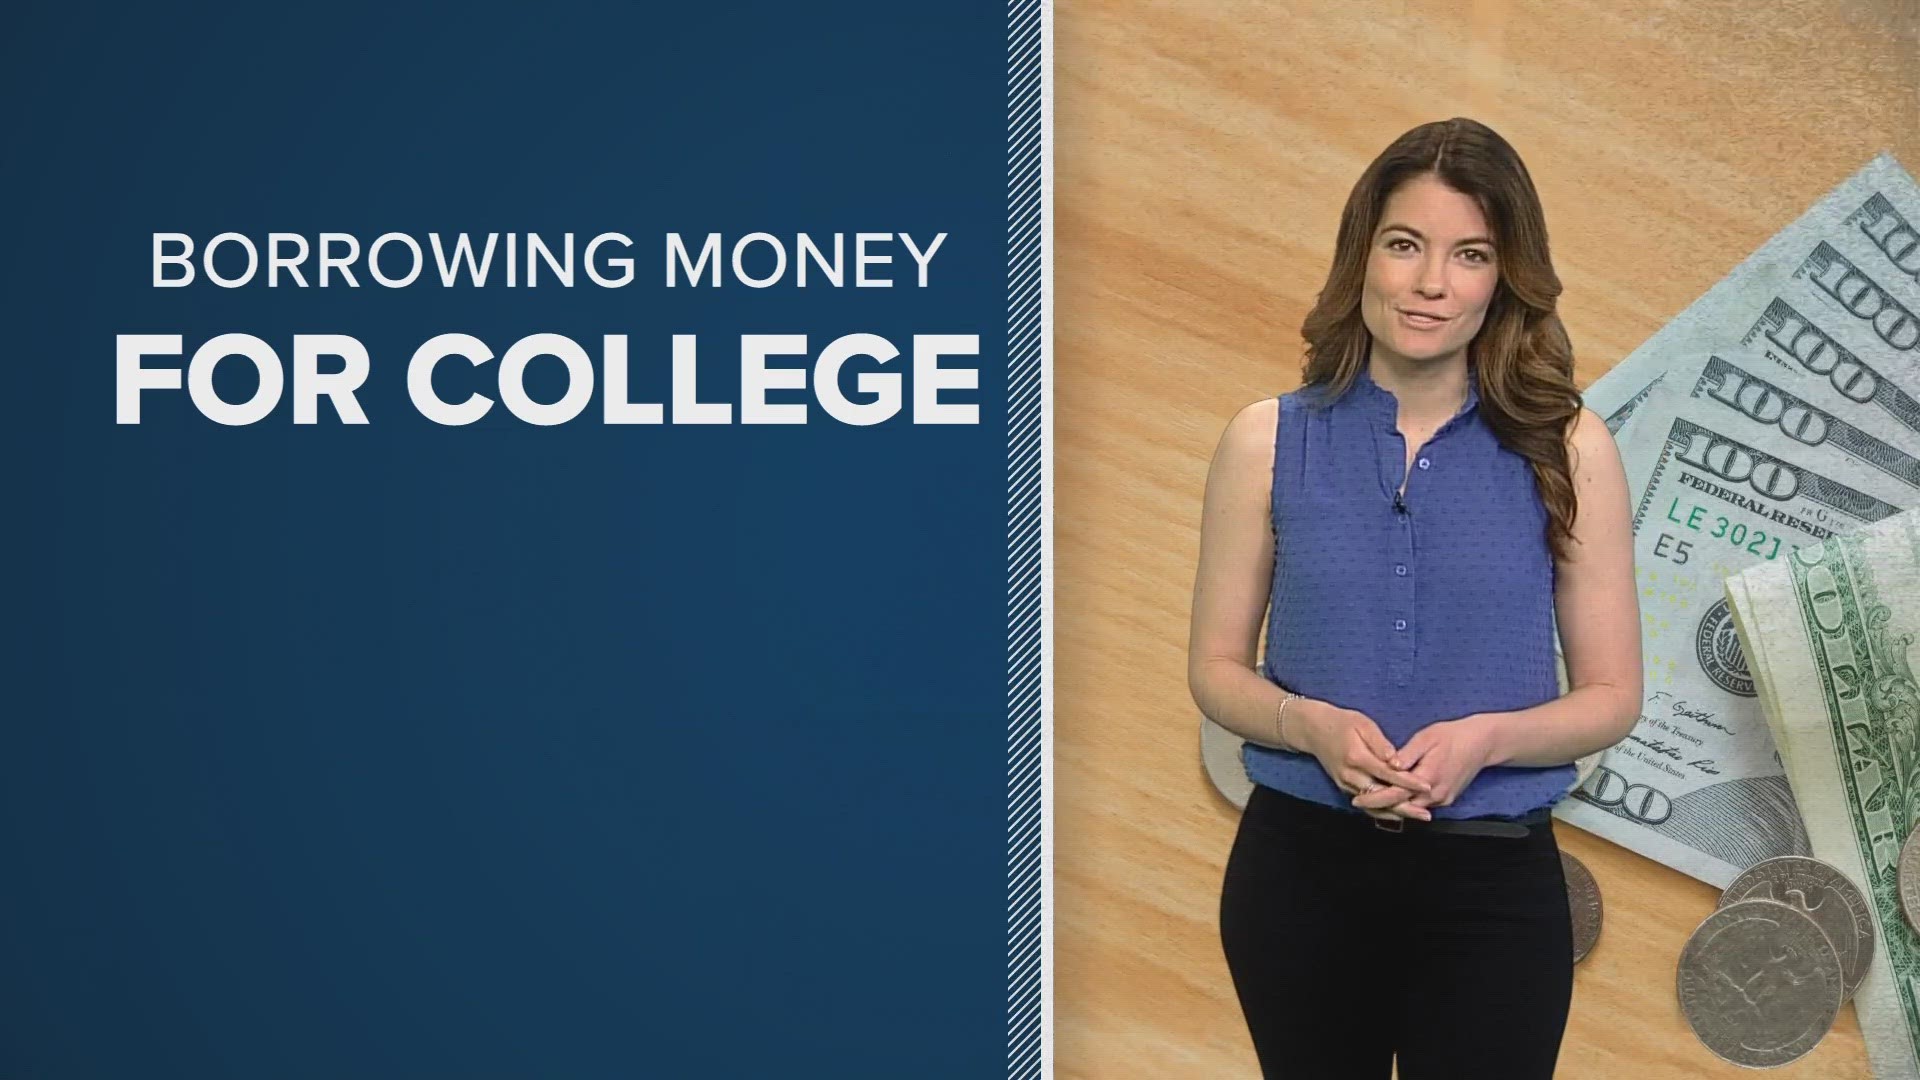 Allison Gormly tells us "What's the Deal?" with student loan rates and how to figure out how much your student can afford to borrow.